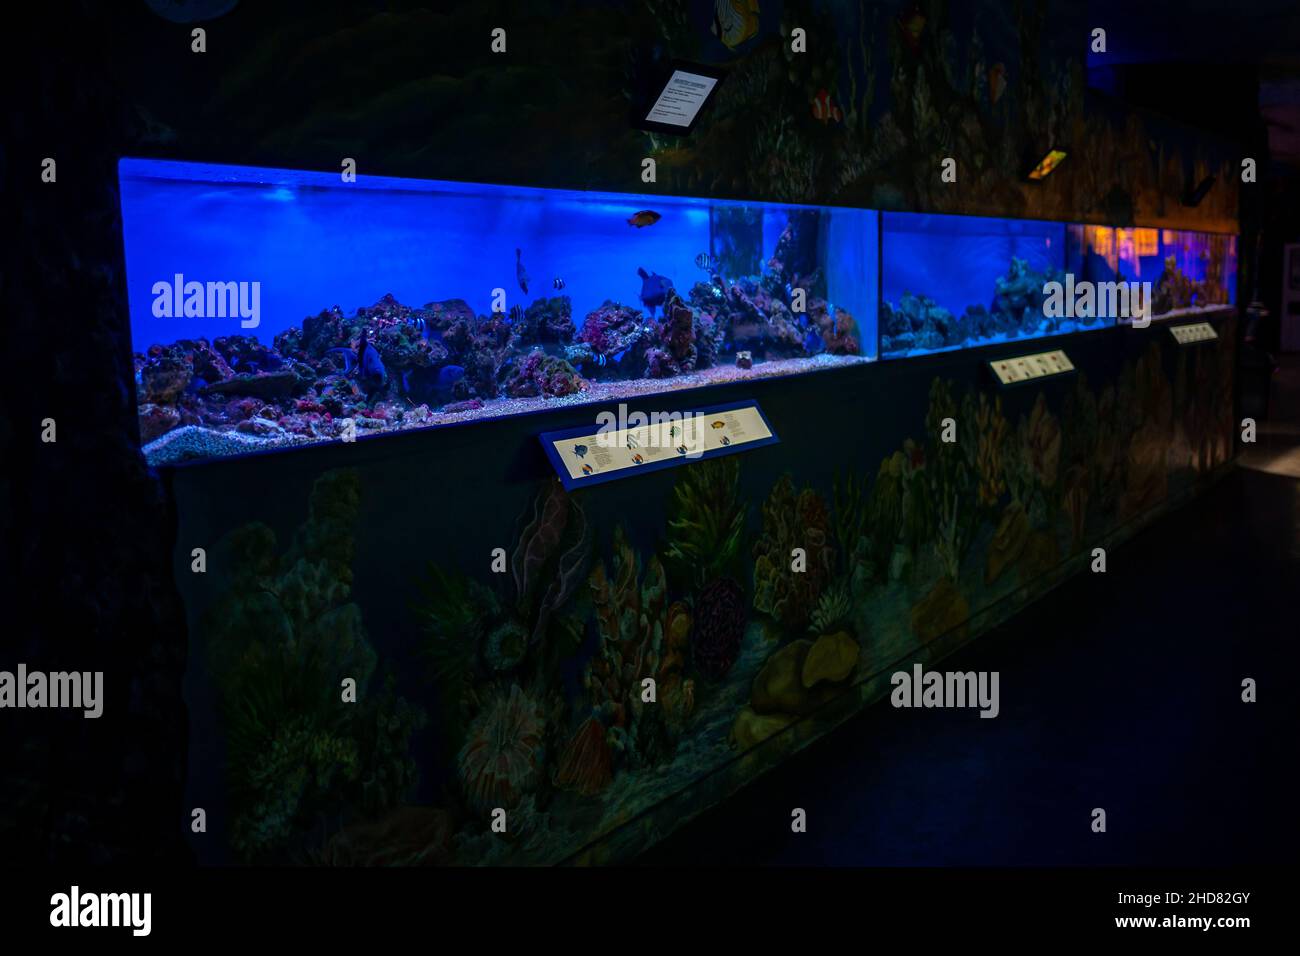 Prague, Czech Republic - January 2, 2022: Beautiful aquarium with different types of fish and corals in the neon light in Prague, Czech republic Stock Photo